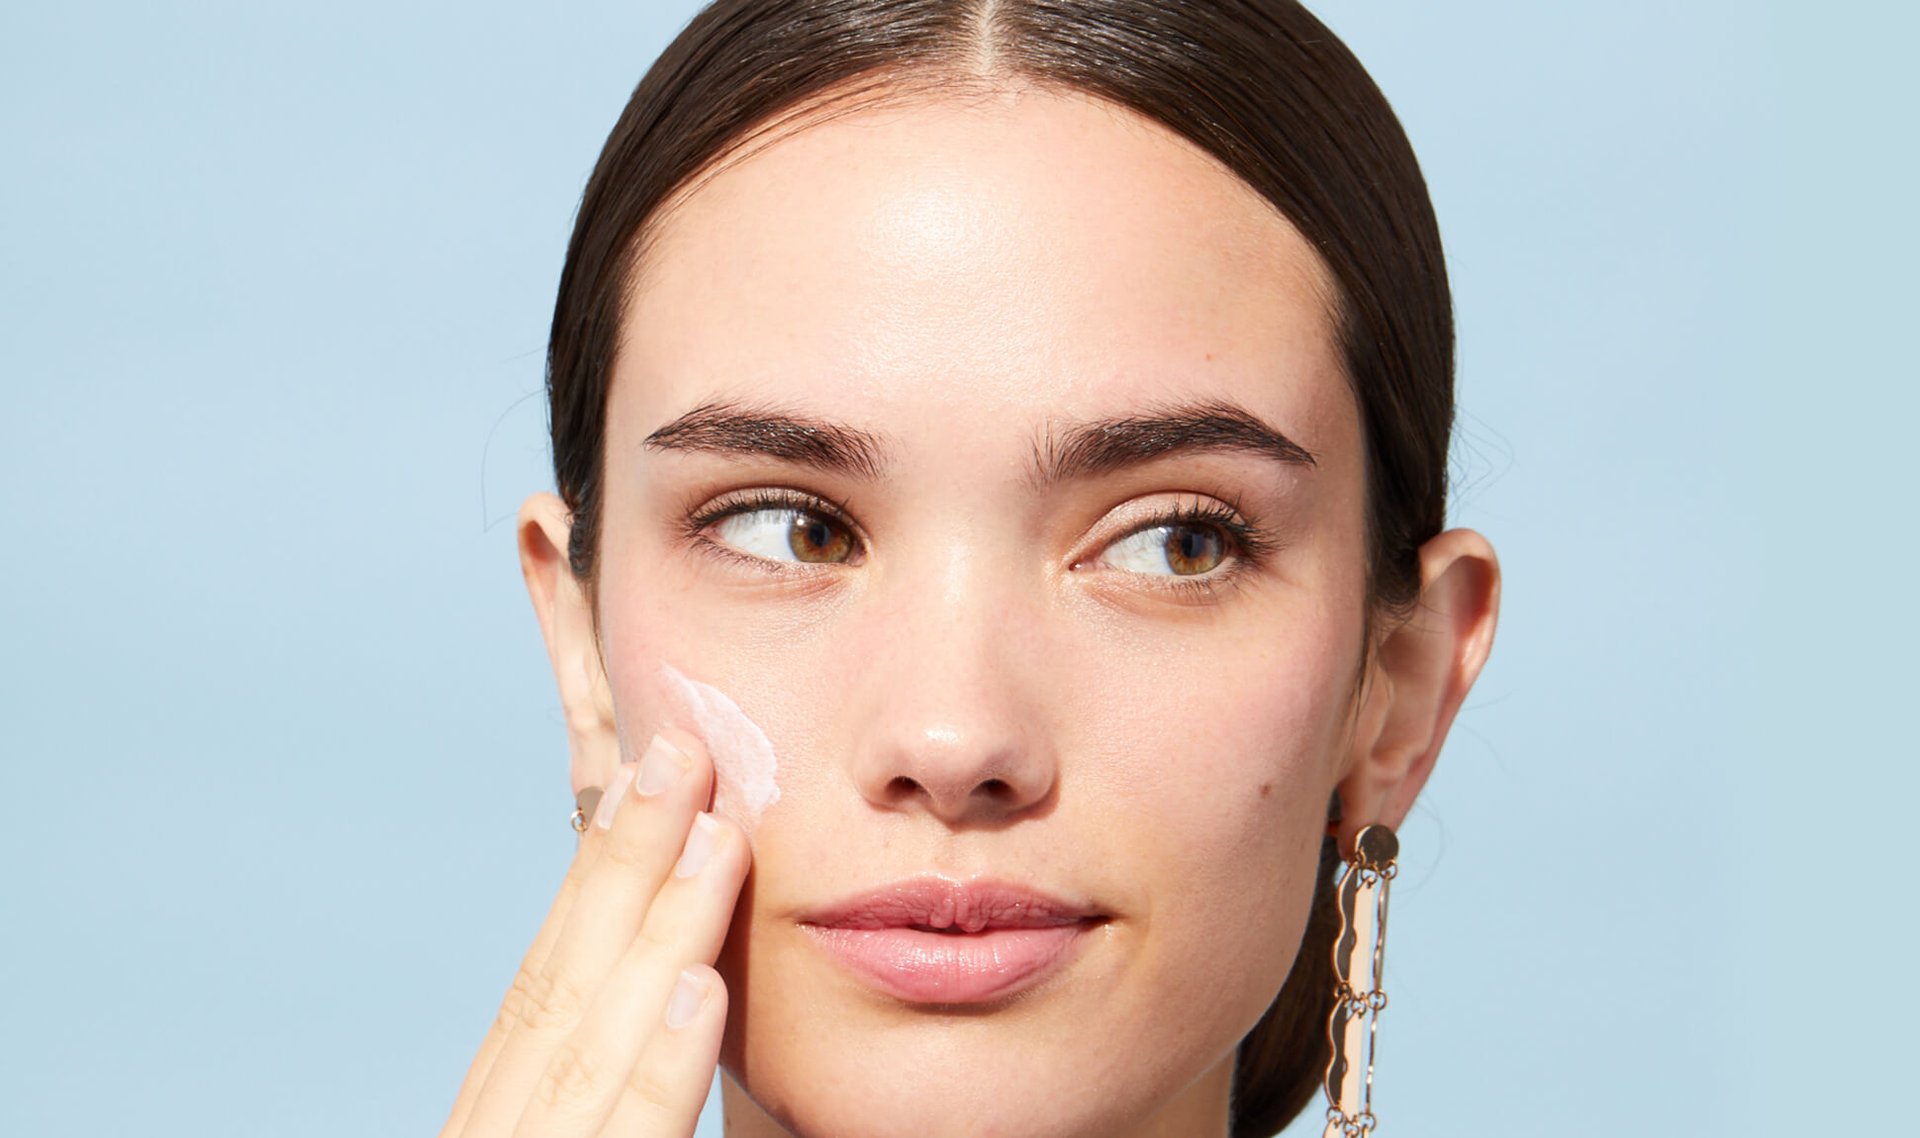 Press or Pat? The Best Application Techniques for Applying Skin-Care